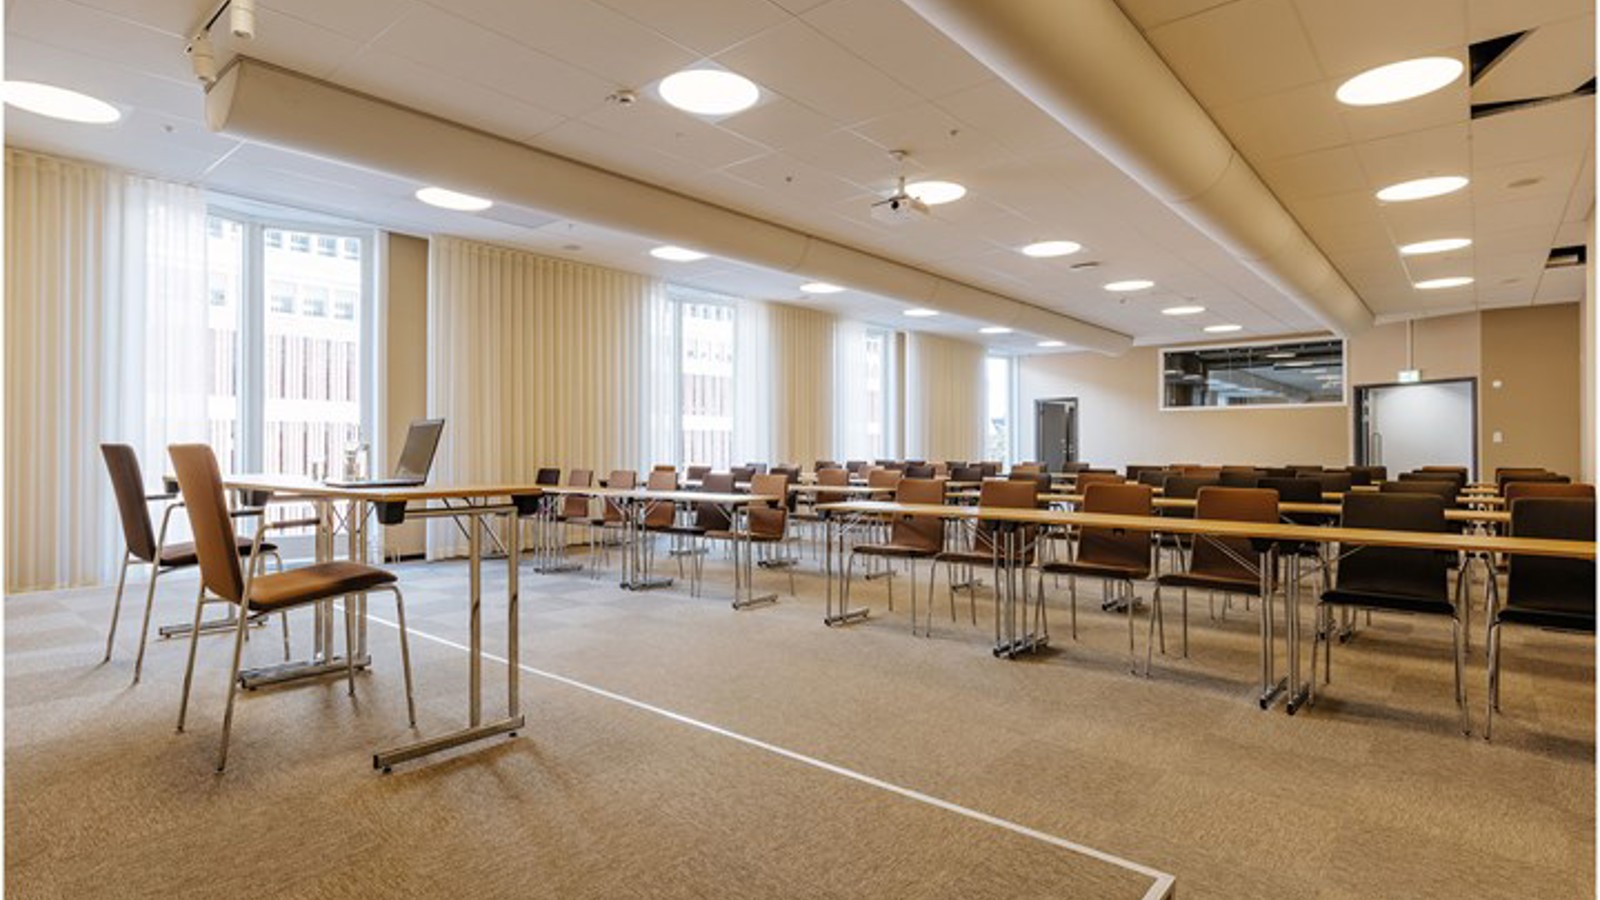 Conference room in school seating, with stage and large windows